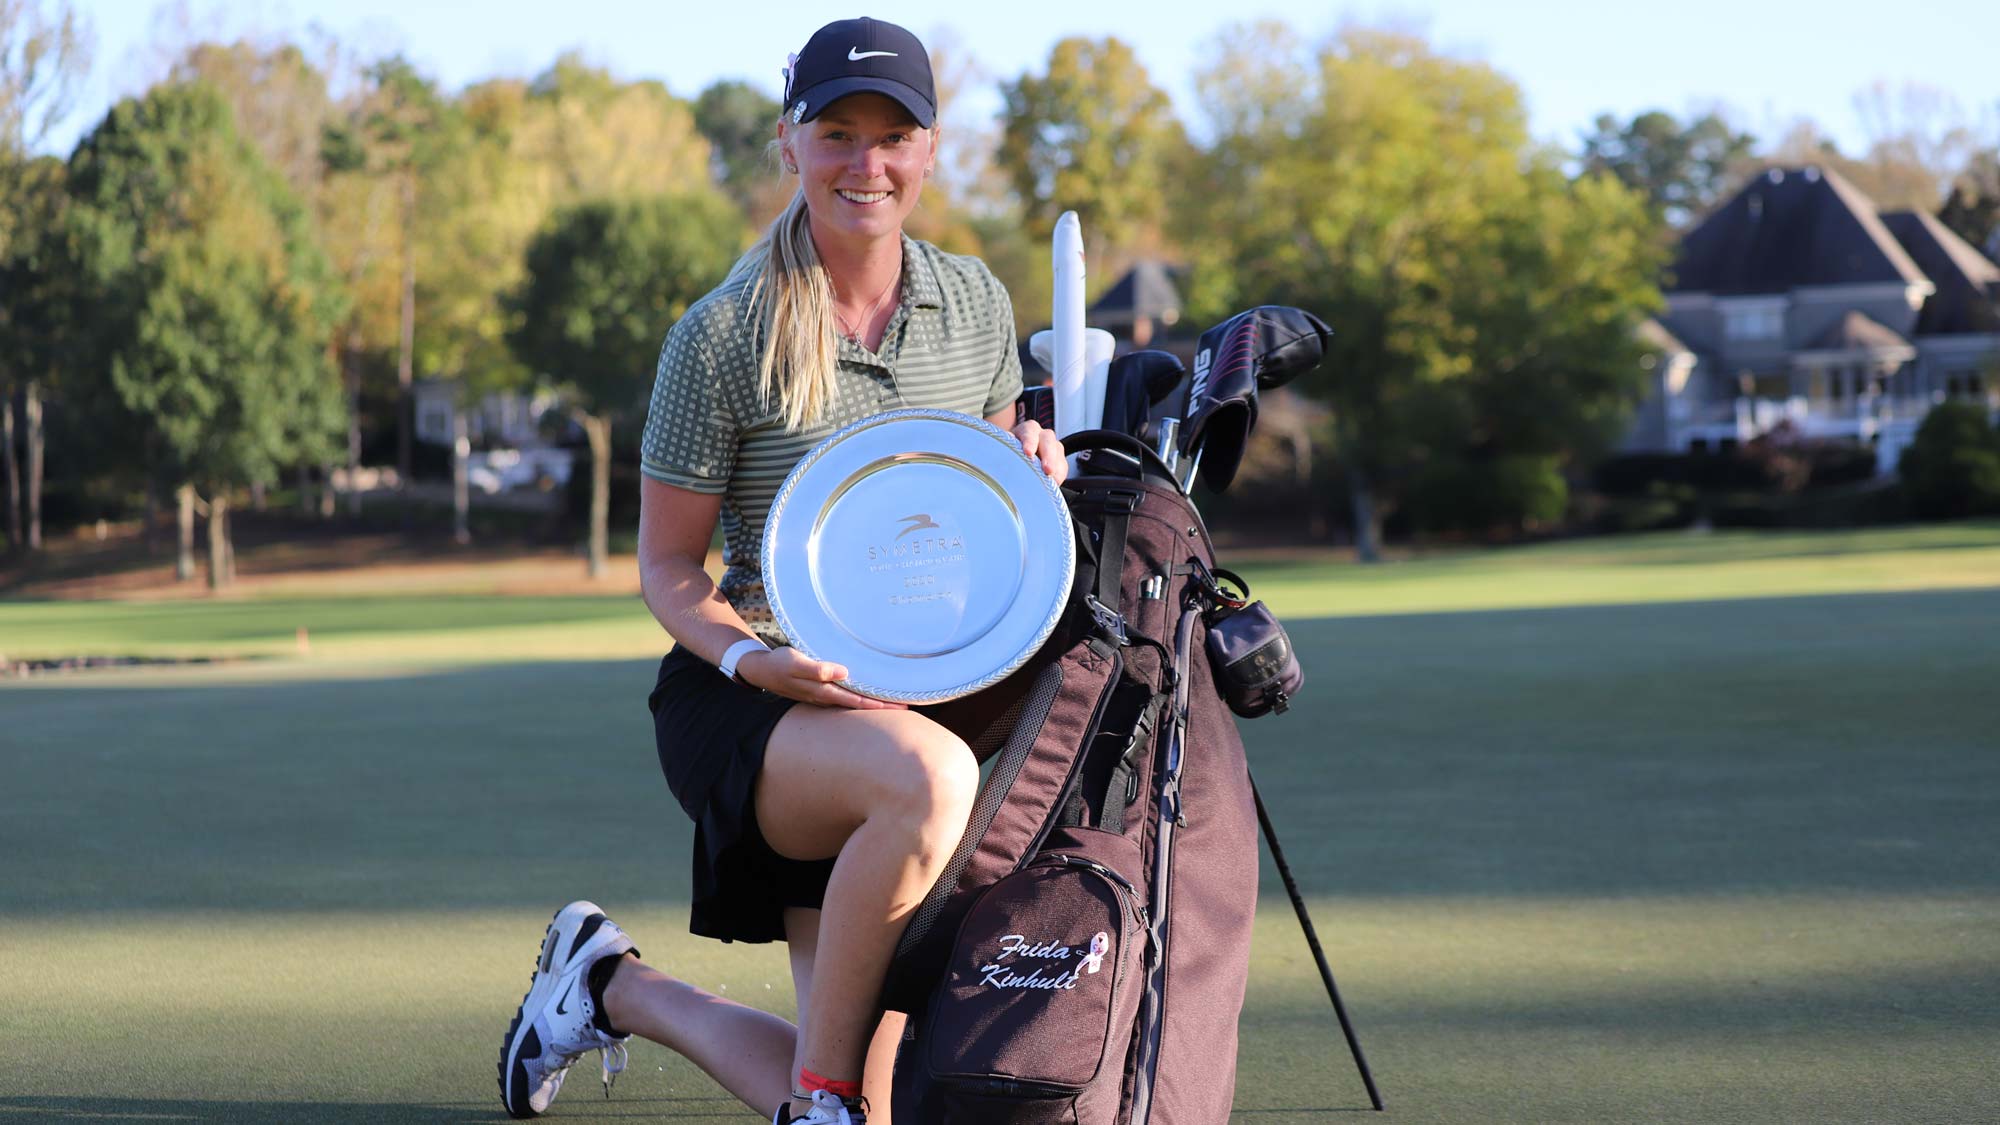 Frida Kinhult with Trophy and Bag 2020 Tour Champ